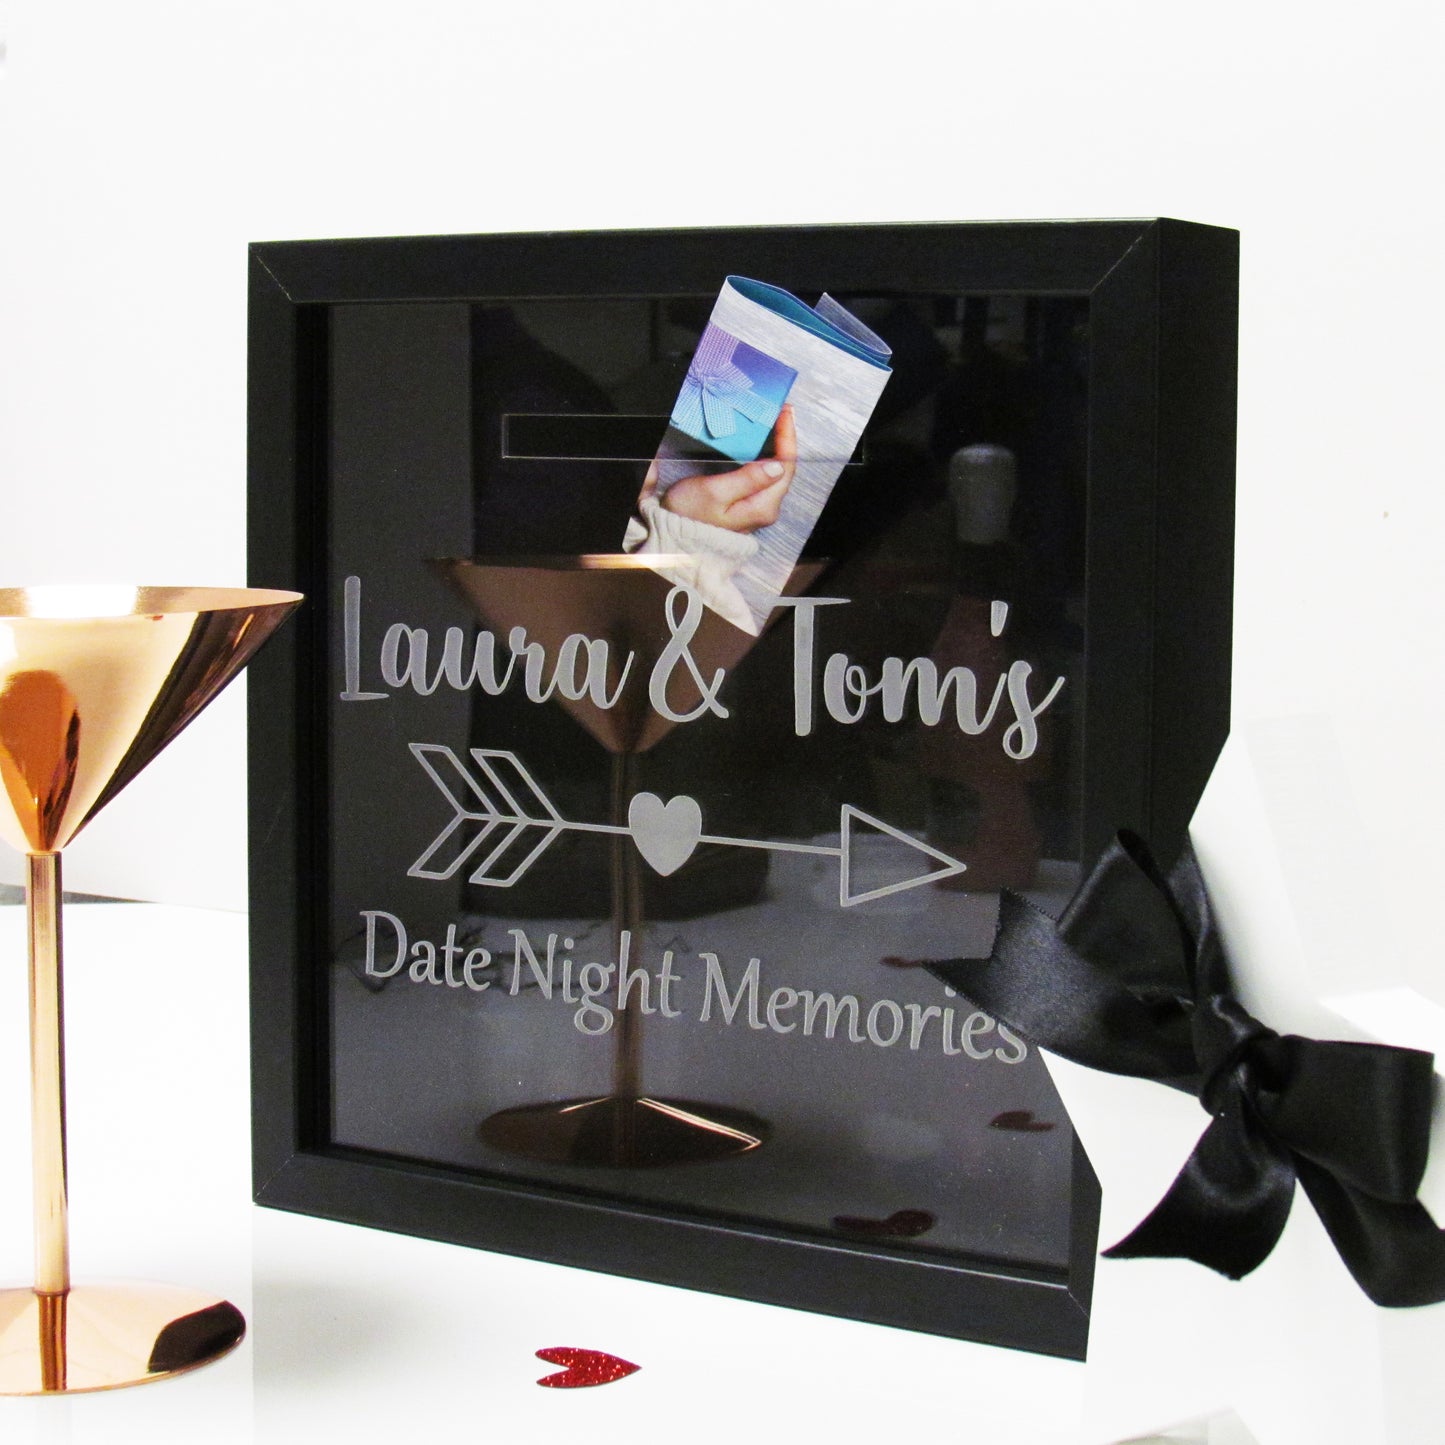 Date Night Memories Collection Box